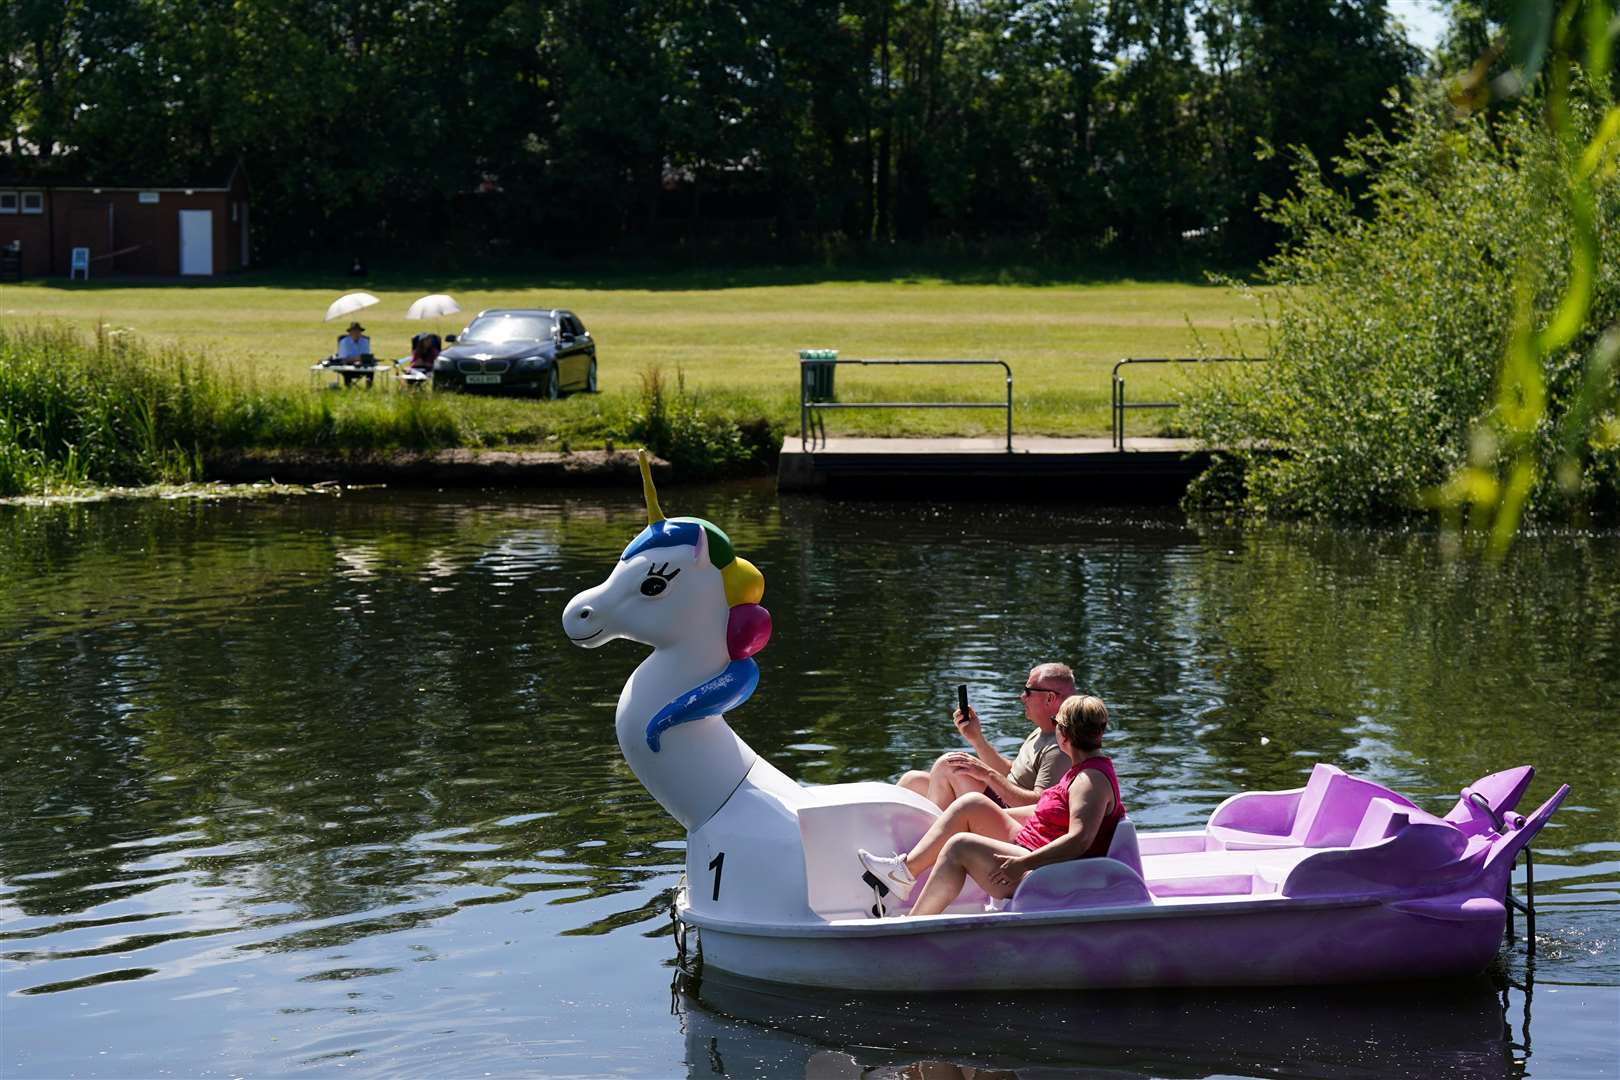 A couple enjoy the warm weather with a pedalo trip on the River Avon in Warwick (Jacob King/PA)